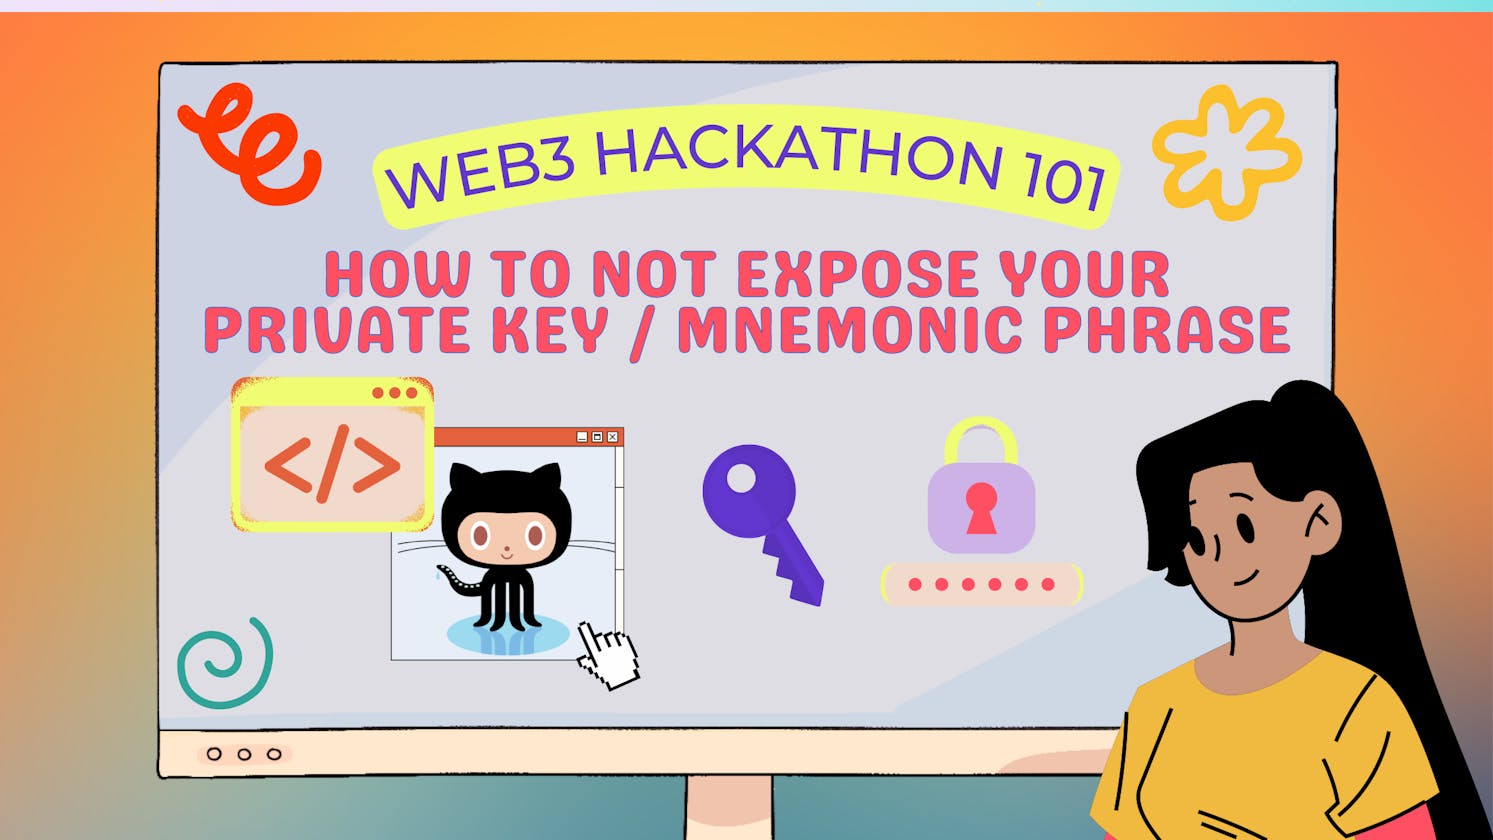 Web3 Hackathon 101: How To Not Expose Your Private Key / Mnemonic Phrase